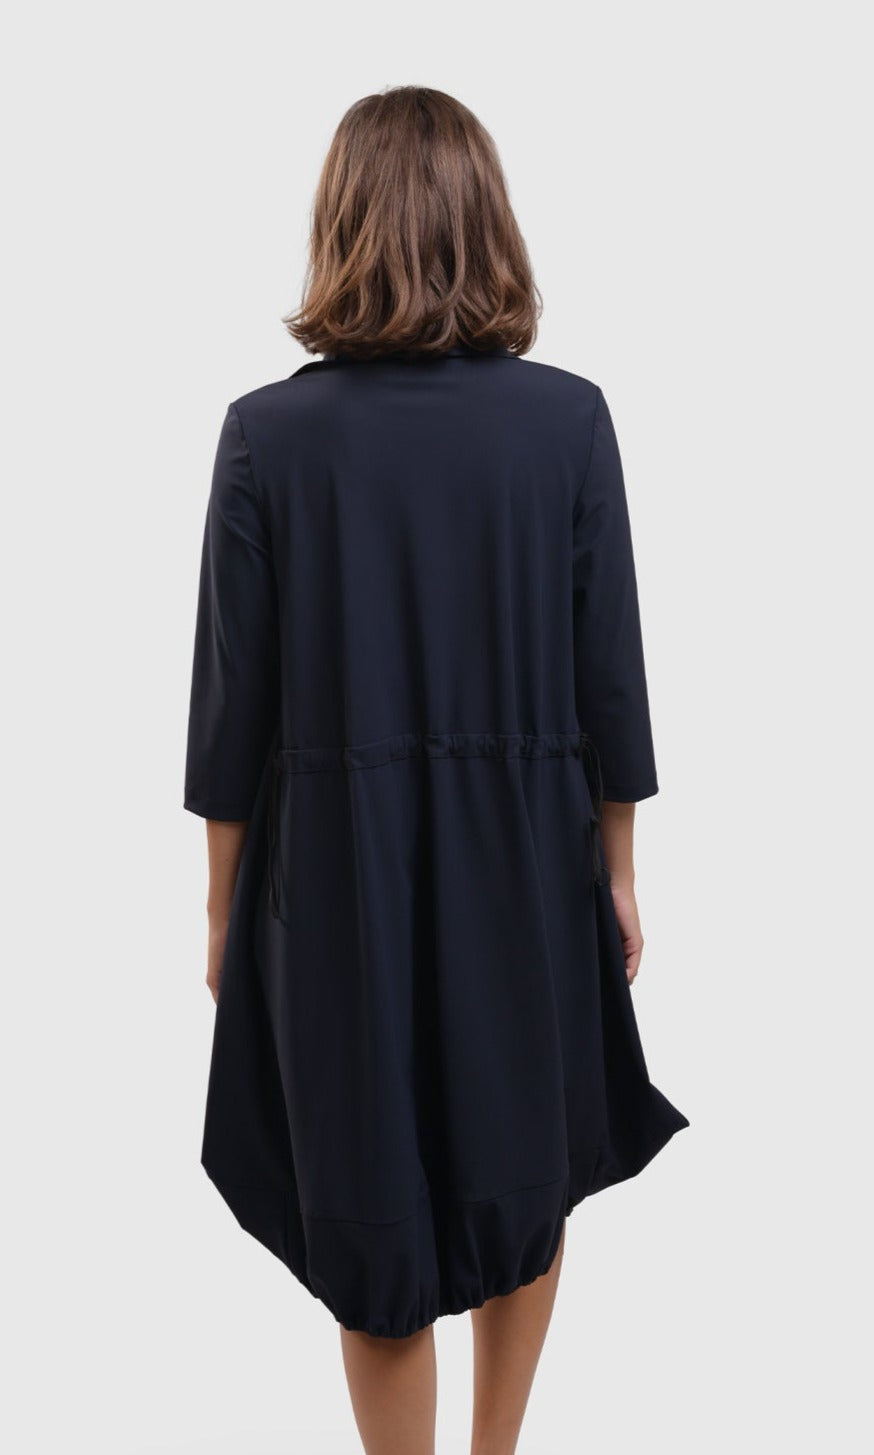 Back top half view of a woman wearing the alembika tekbika navy Dress. This dress sits at the knees and has a bubble skirt and 3/4 length sleeves. The back has a cinch at the waist.